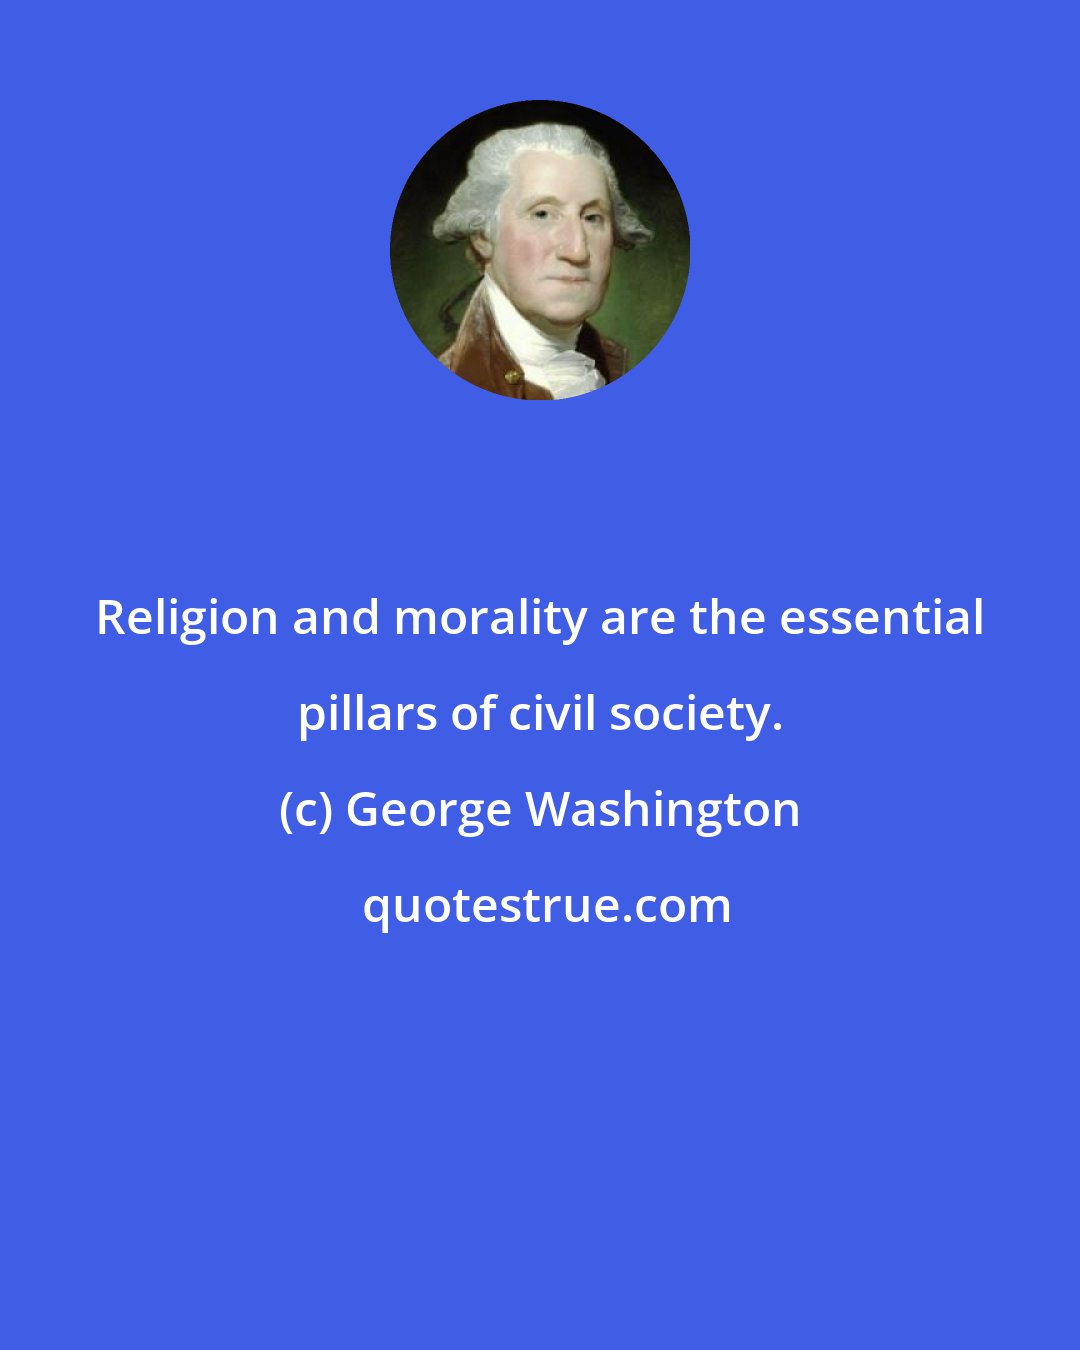 George Washington: Religion and morality are the essential pillars of civil society.